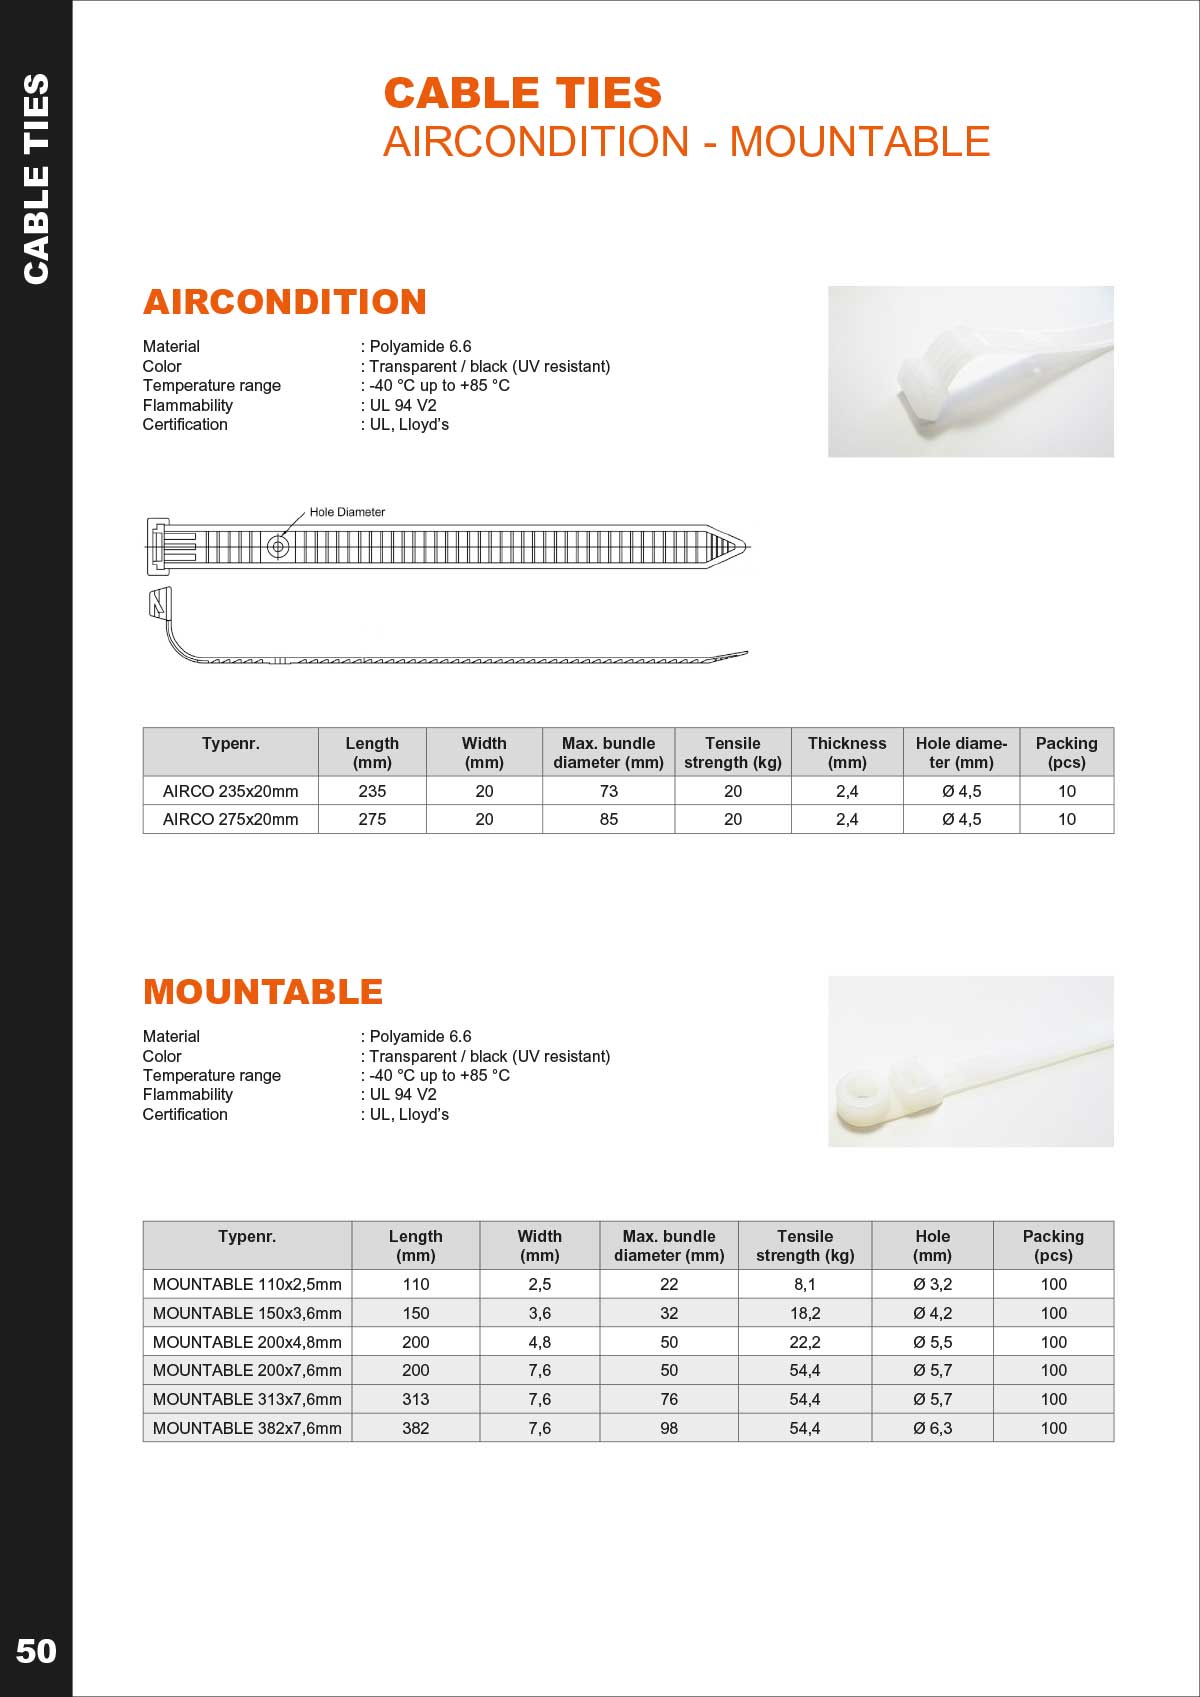 ATIE-Mountable cable ties